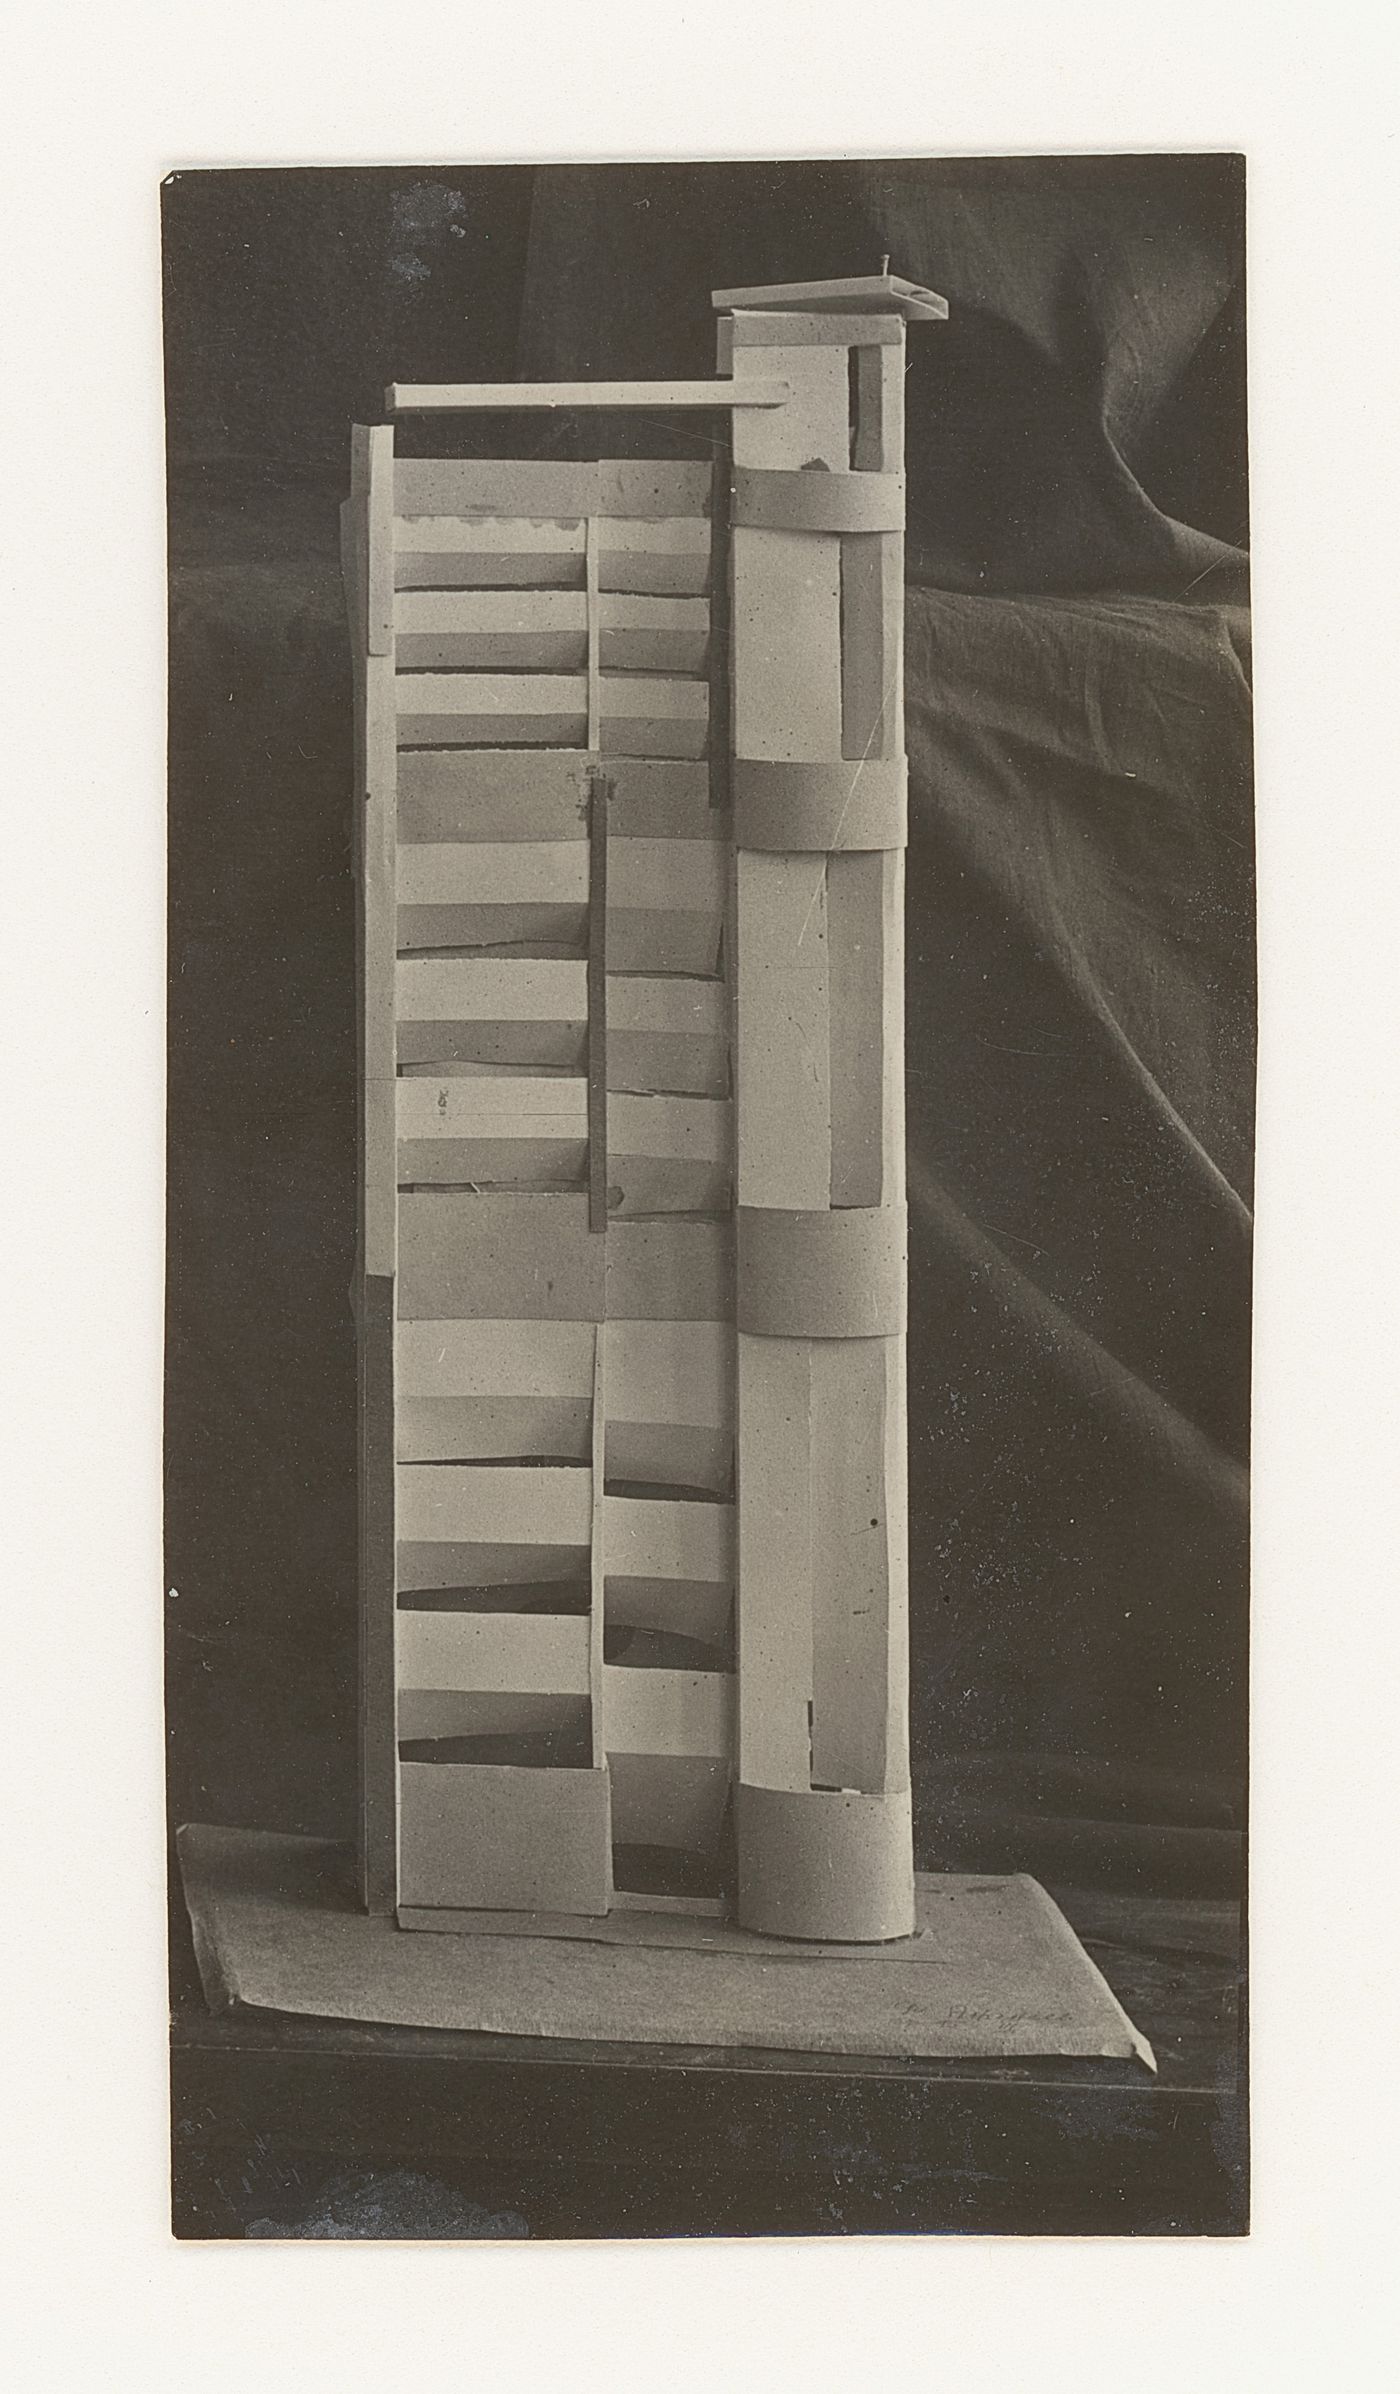 Photograph of a student model on the topic "Frontal Surface. Vertically Limited Rhythmical Row", for the "Space" course at the Vkhutemas (Higher State Artistic Technical Studios), Moscow